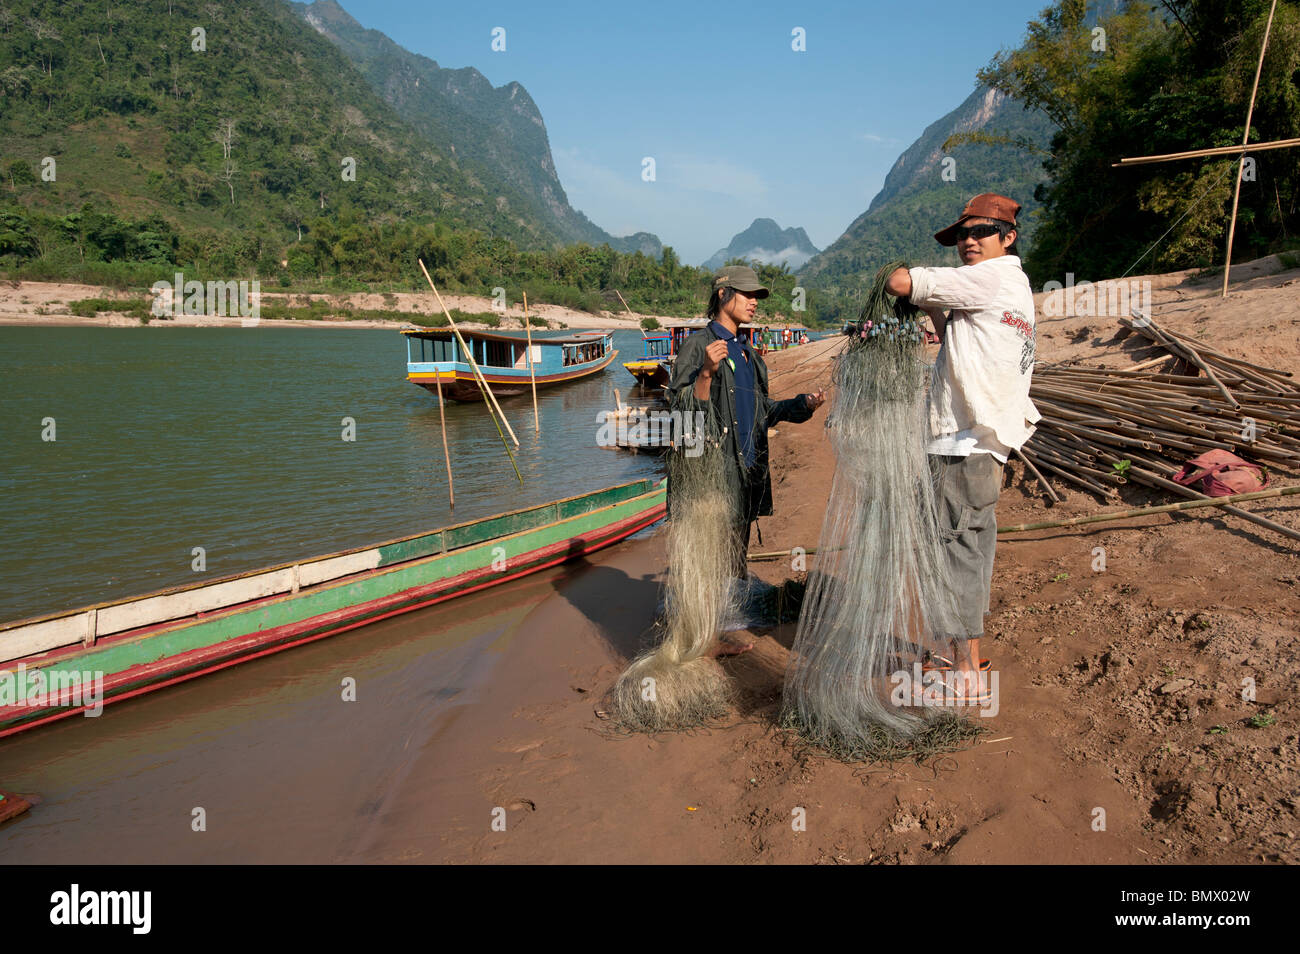 Fishermen arranging their nets on the banks of the Nam Ou river in Northern Laos Stock Photo